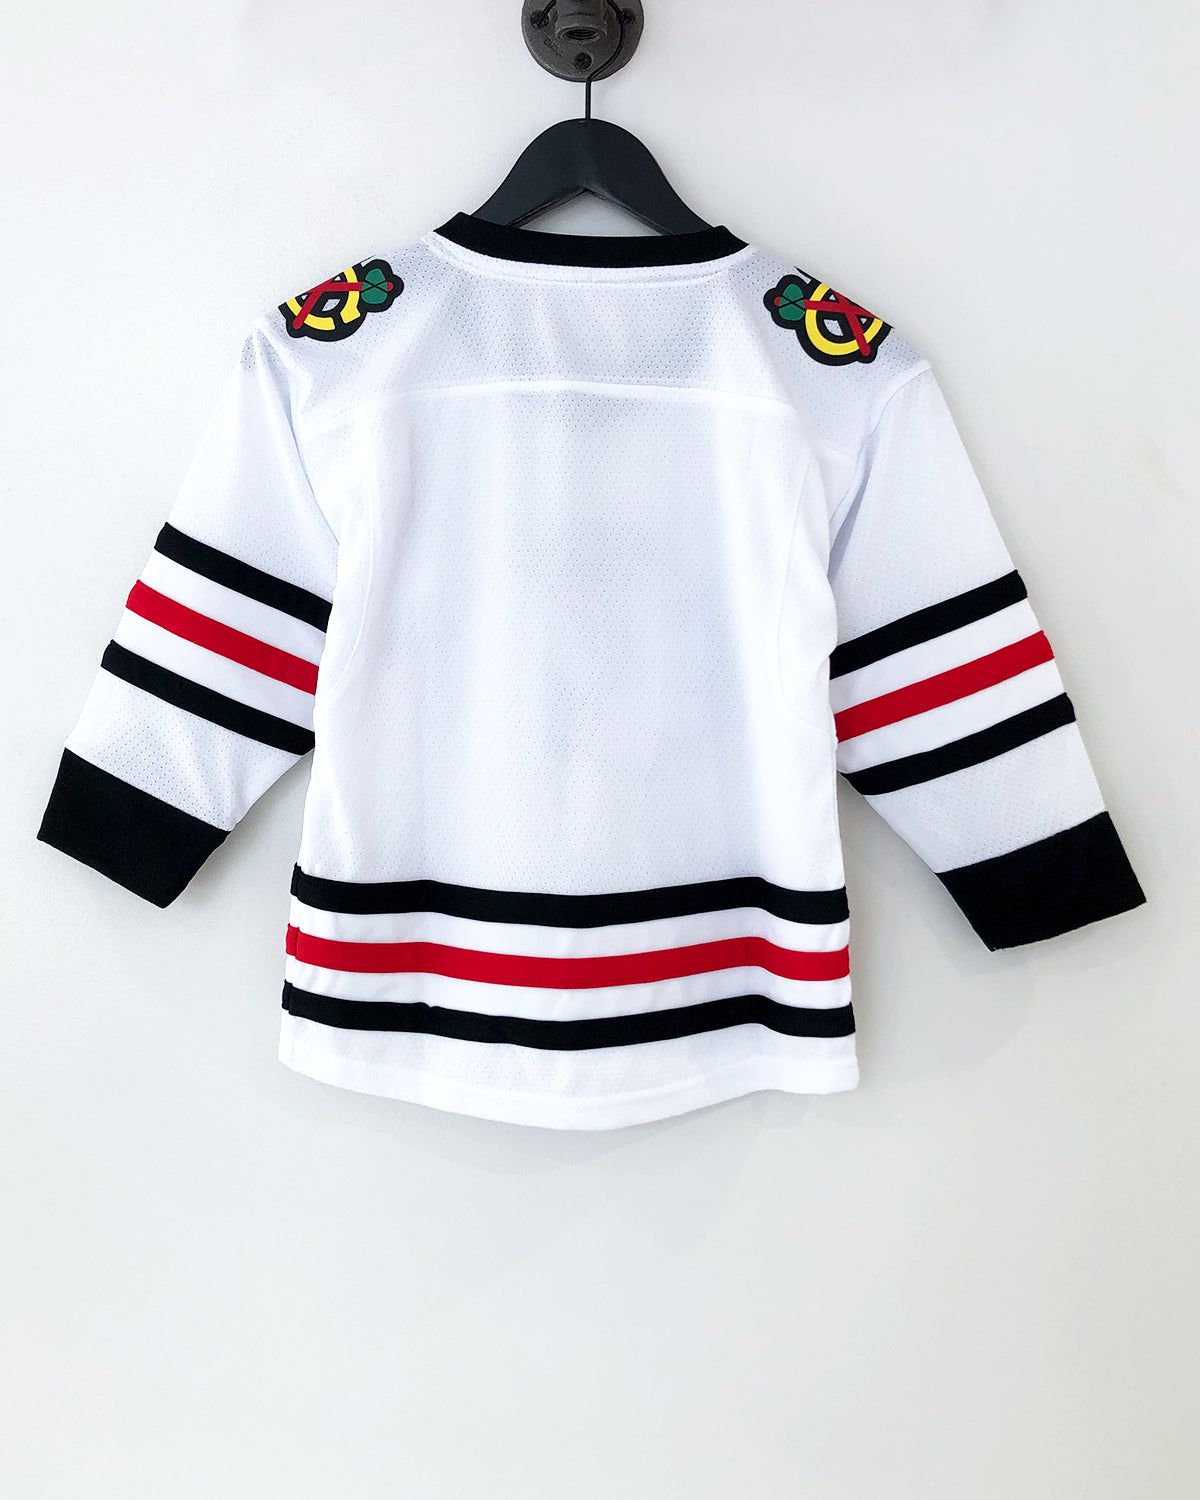 Outerstuff NHL Youth/Kids Chicago Blackhawks Performance Full Zip